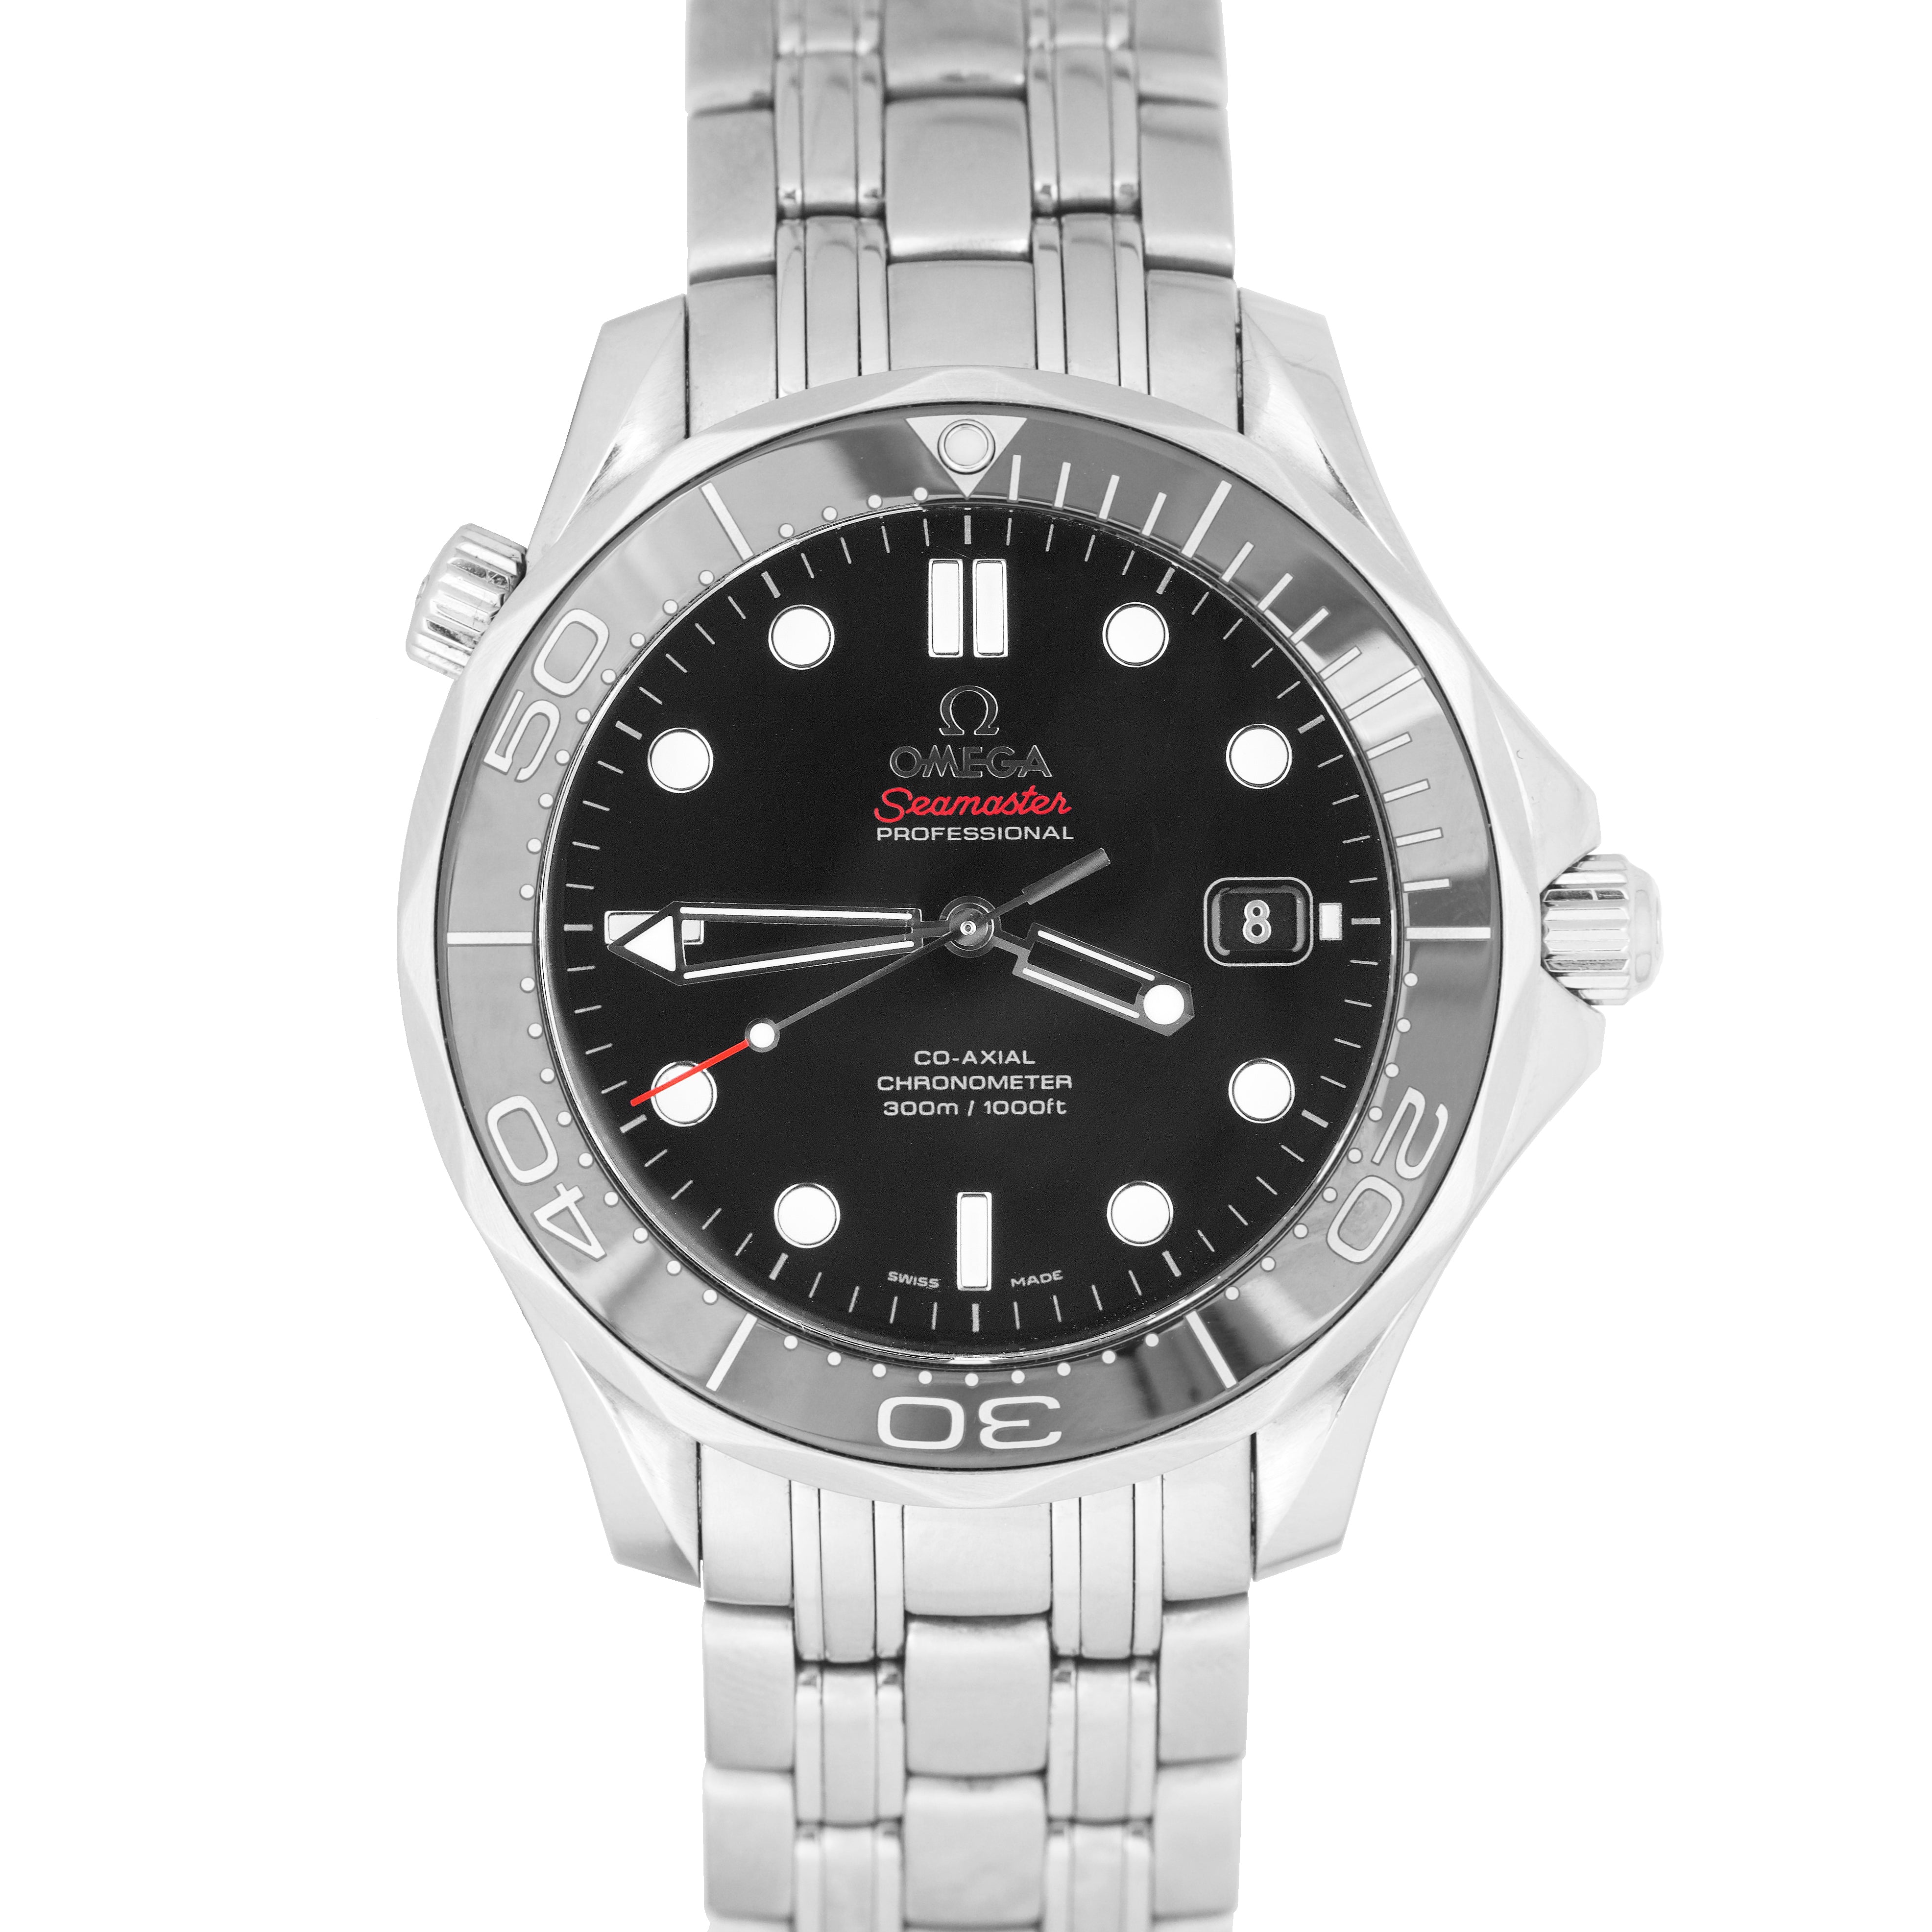 Omega Seamaster Professional 300M 252.30 Black Stainless Automatic 41mm Watch